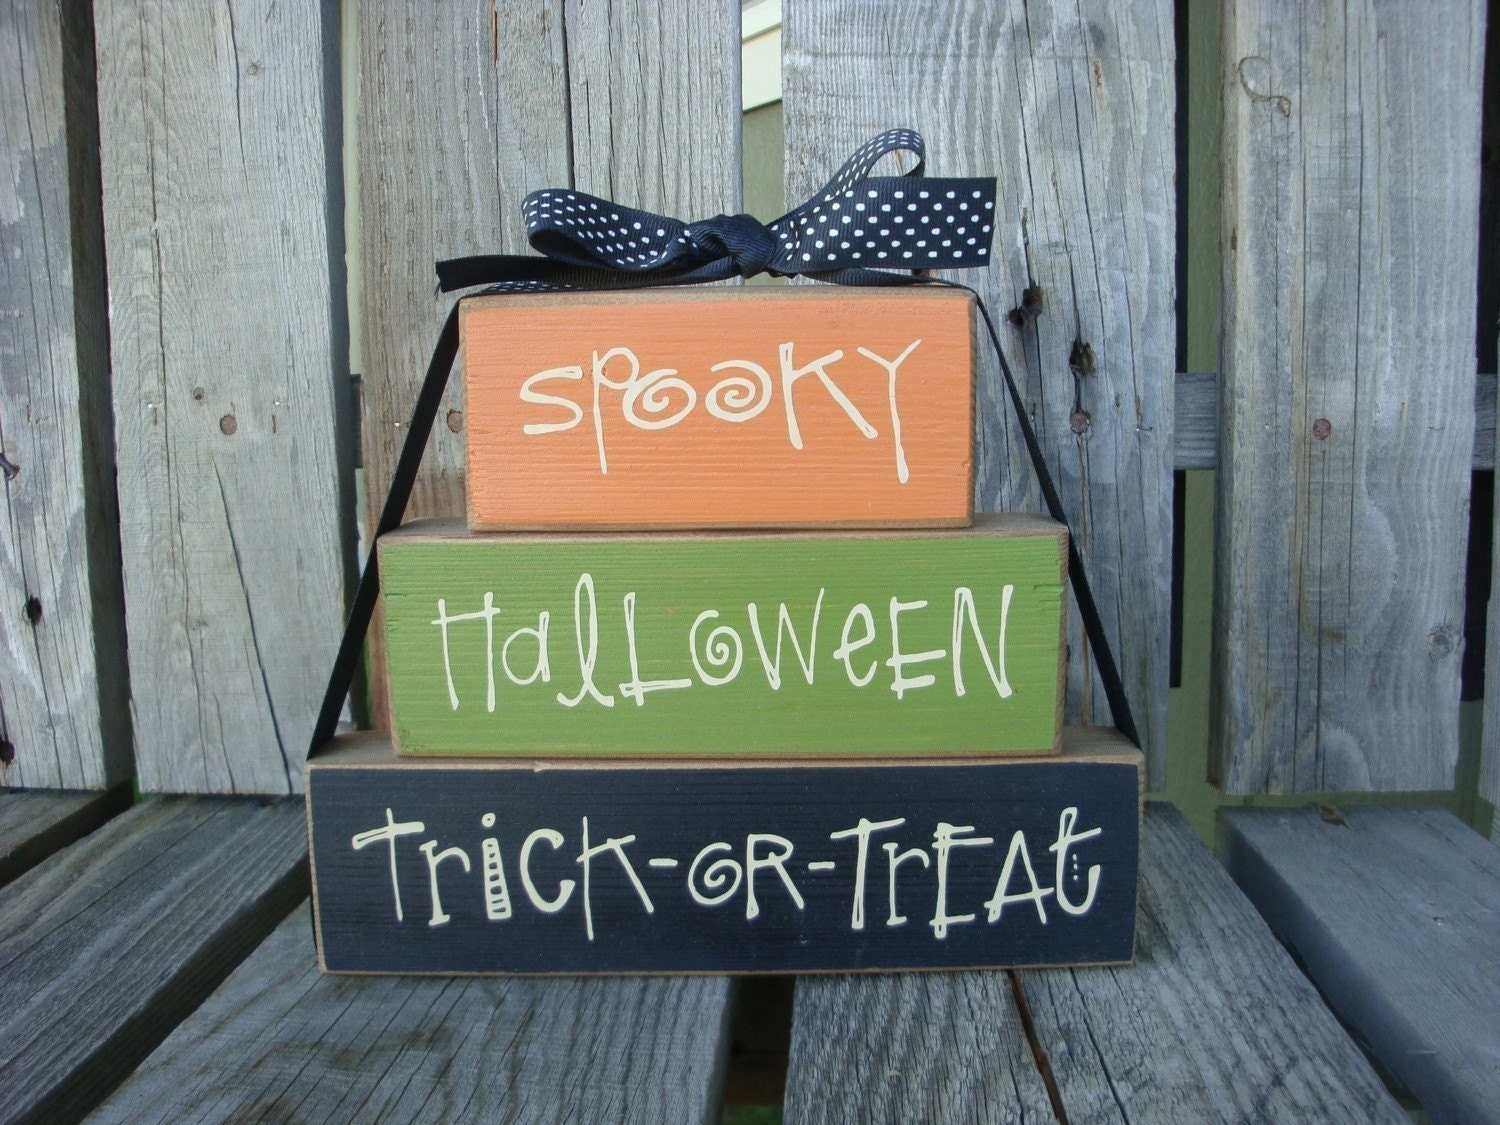 HaLlOwEeN Stacker Block Set - Goes GREAT with the other FALL items